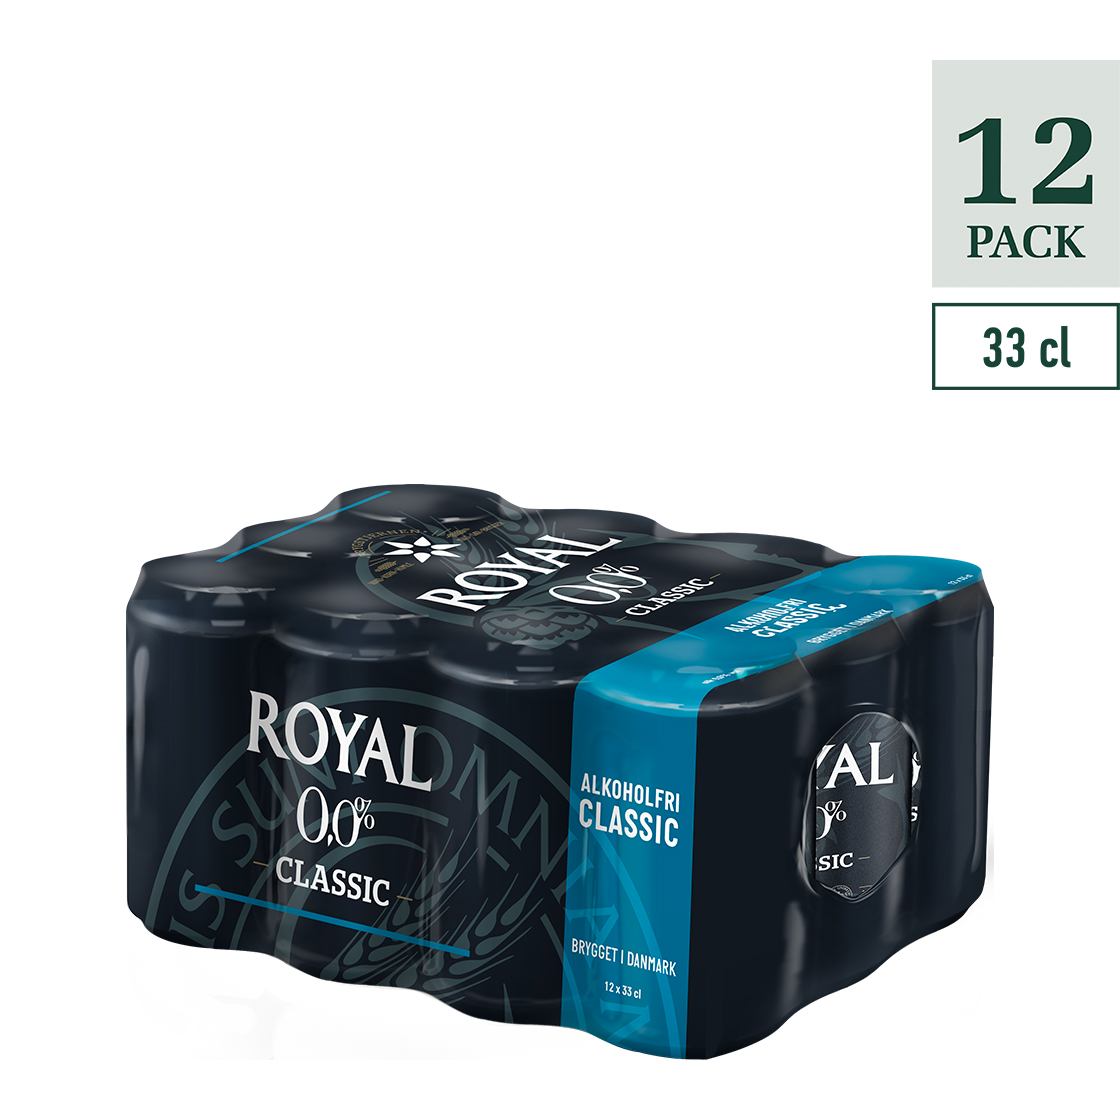 Royal Classic 0,0% 33CL Cans 12PACK 4*44/12/33